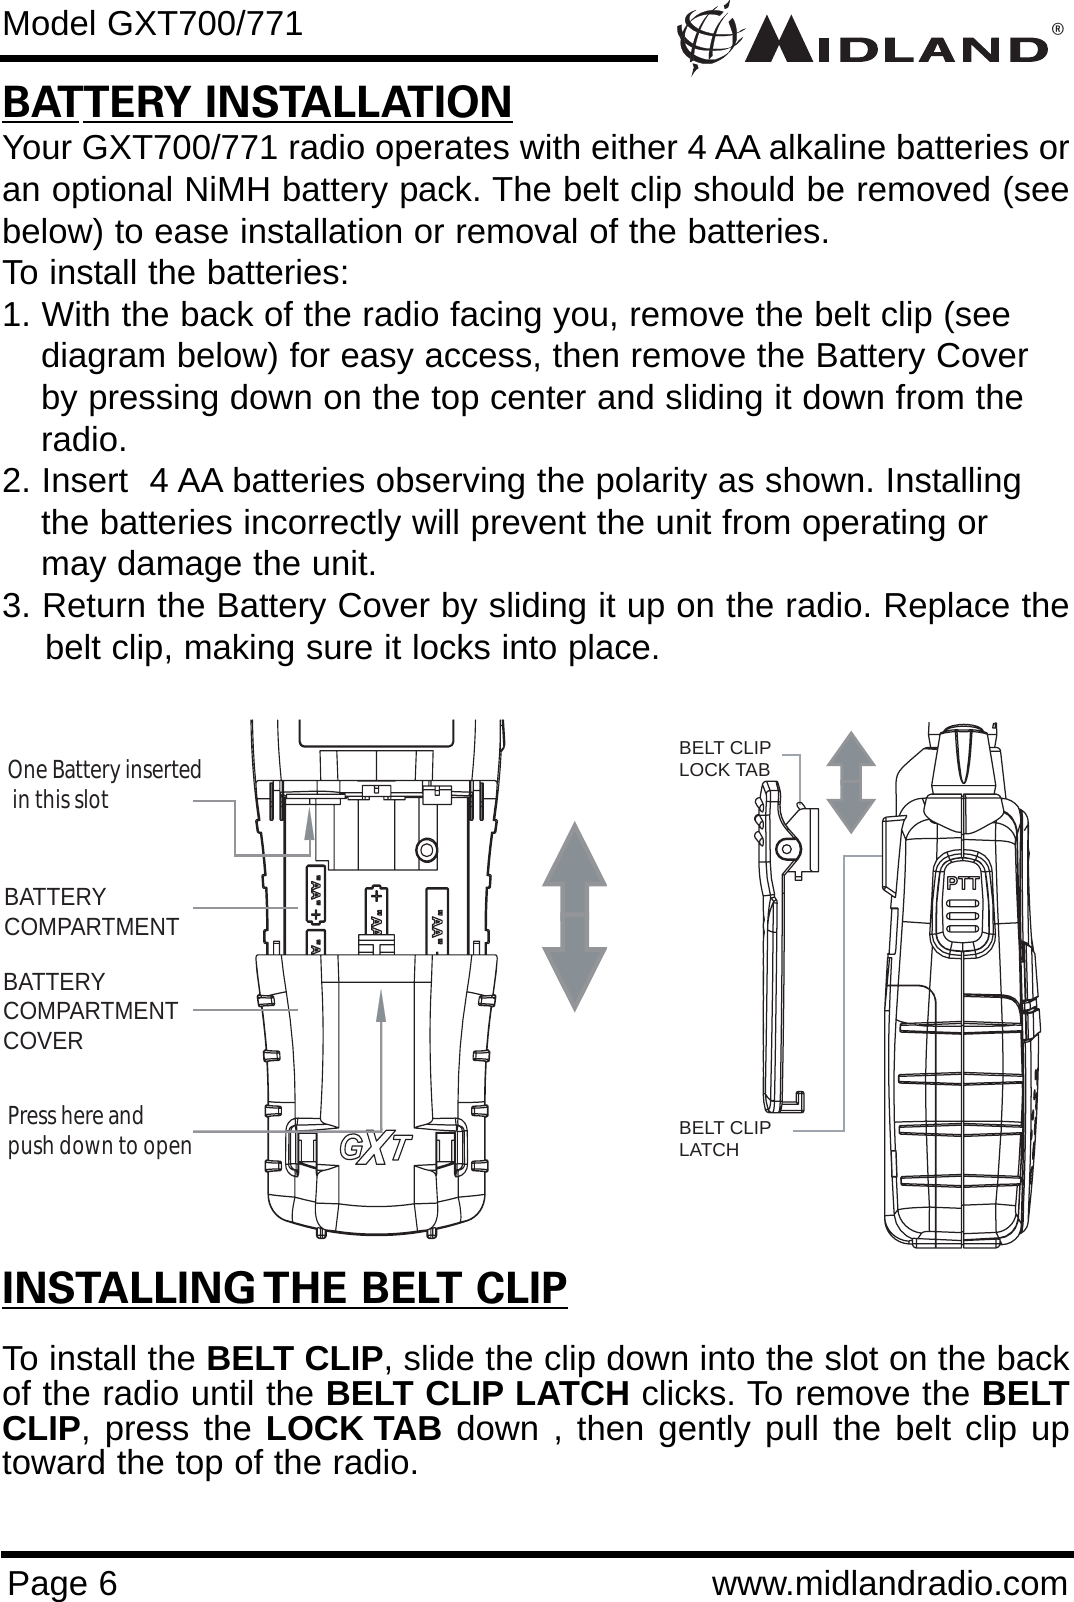 ®Page 6 www.midlandradio.comBATTERY INSTALLATIONYour GXT700/771 radio operates with either 4 AA alkaline batteries oran optional NiMH battery pack. The belt clip should be removed (seebelow) to ease installation or removal of the batteries. To install the batteries:1. With the back of the radio facing you, remove the belt clip (see diagram below) for easy access, then remove the Battery Cover by pressing down on the top center and sliding it down from the radio.2. Insert  4 AA batteries observing the polarity as shown. Installing the batteries incorrectly will prevent the unit from operating or may damage the unit.3. Return the Battery Cover by sliding it up on the radio. Replace thebelt clip, making sure it locks into place.BATTERYCOMPARTMENTBATTERYCOMPARTMENTCOVEROne Battery inserted  in this slotPress here and push down to openModel GXT700/771INSTALLING THE BELT CLIPTo install the BELT CLIP, slide the clip down into the slot on the backof the radio until the BELT CLIP LATCH clicks. To remove the BELTCLIP, press the LOCK TAB down , then gently pull the belt clip uptoward the top of the radio.BELT CLIPLOCK TABBELT CLIP LATCH